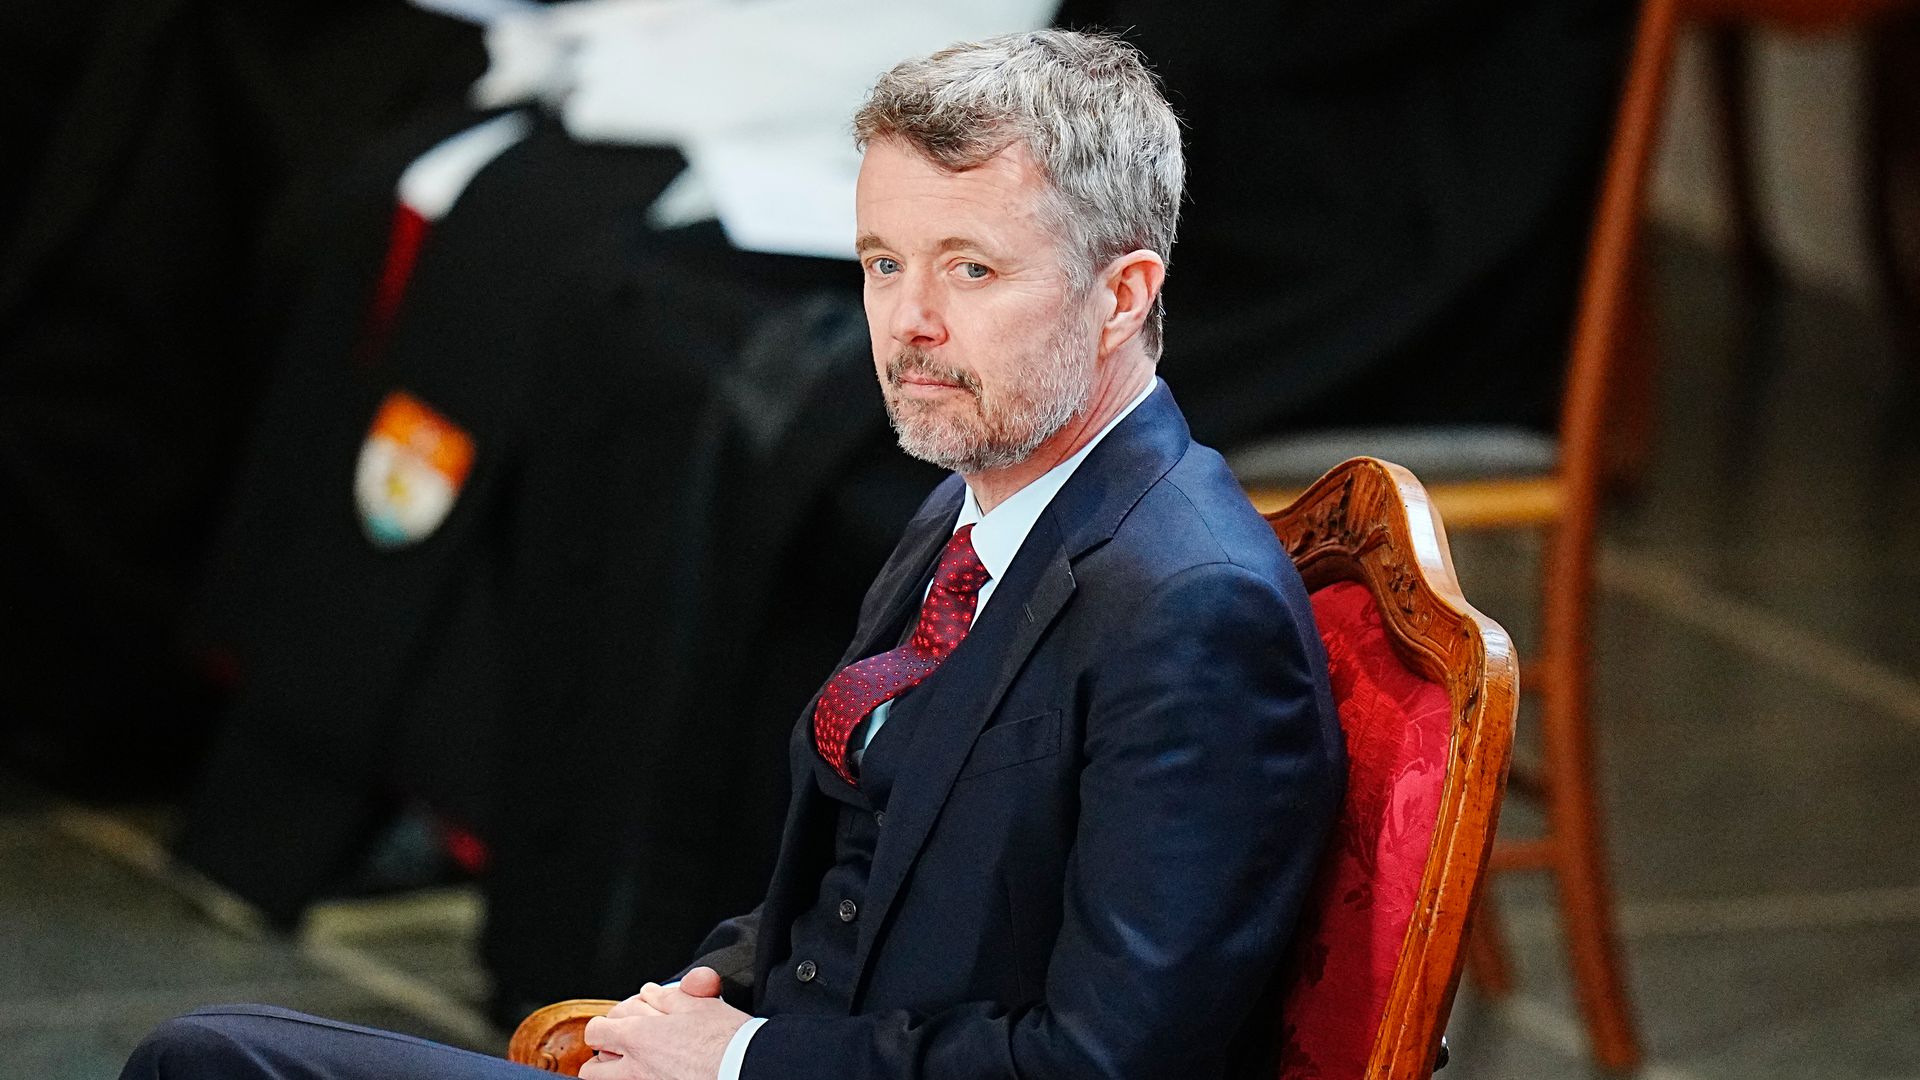 King Frederik seated during church service